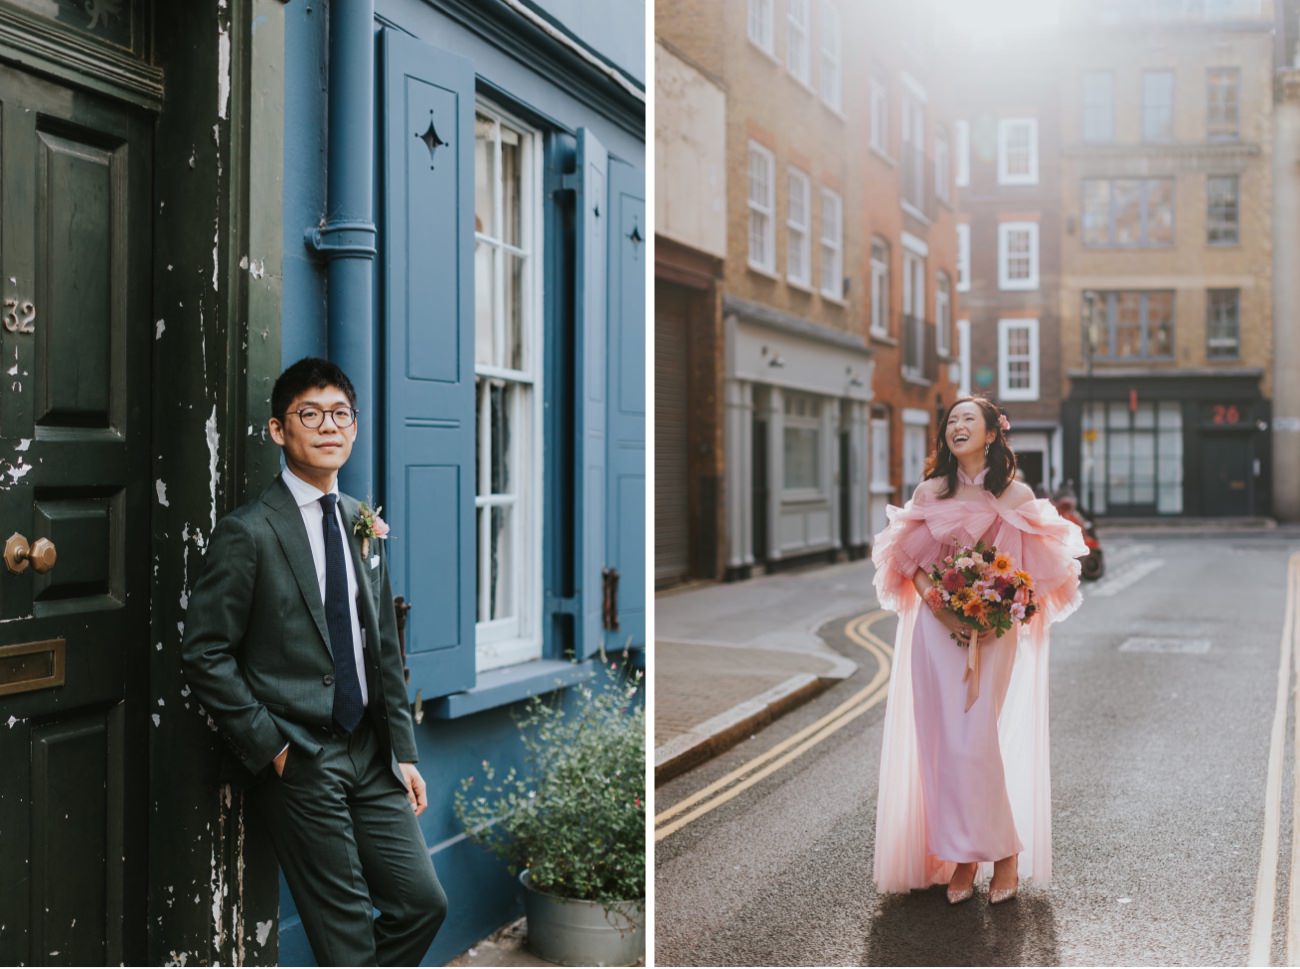 portraits in London Street of Bride and groom in the afternoon light